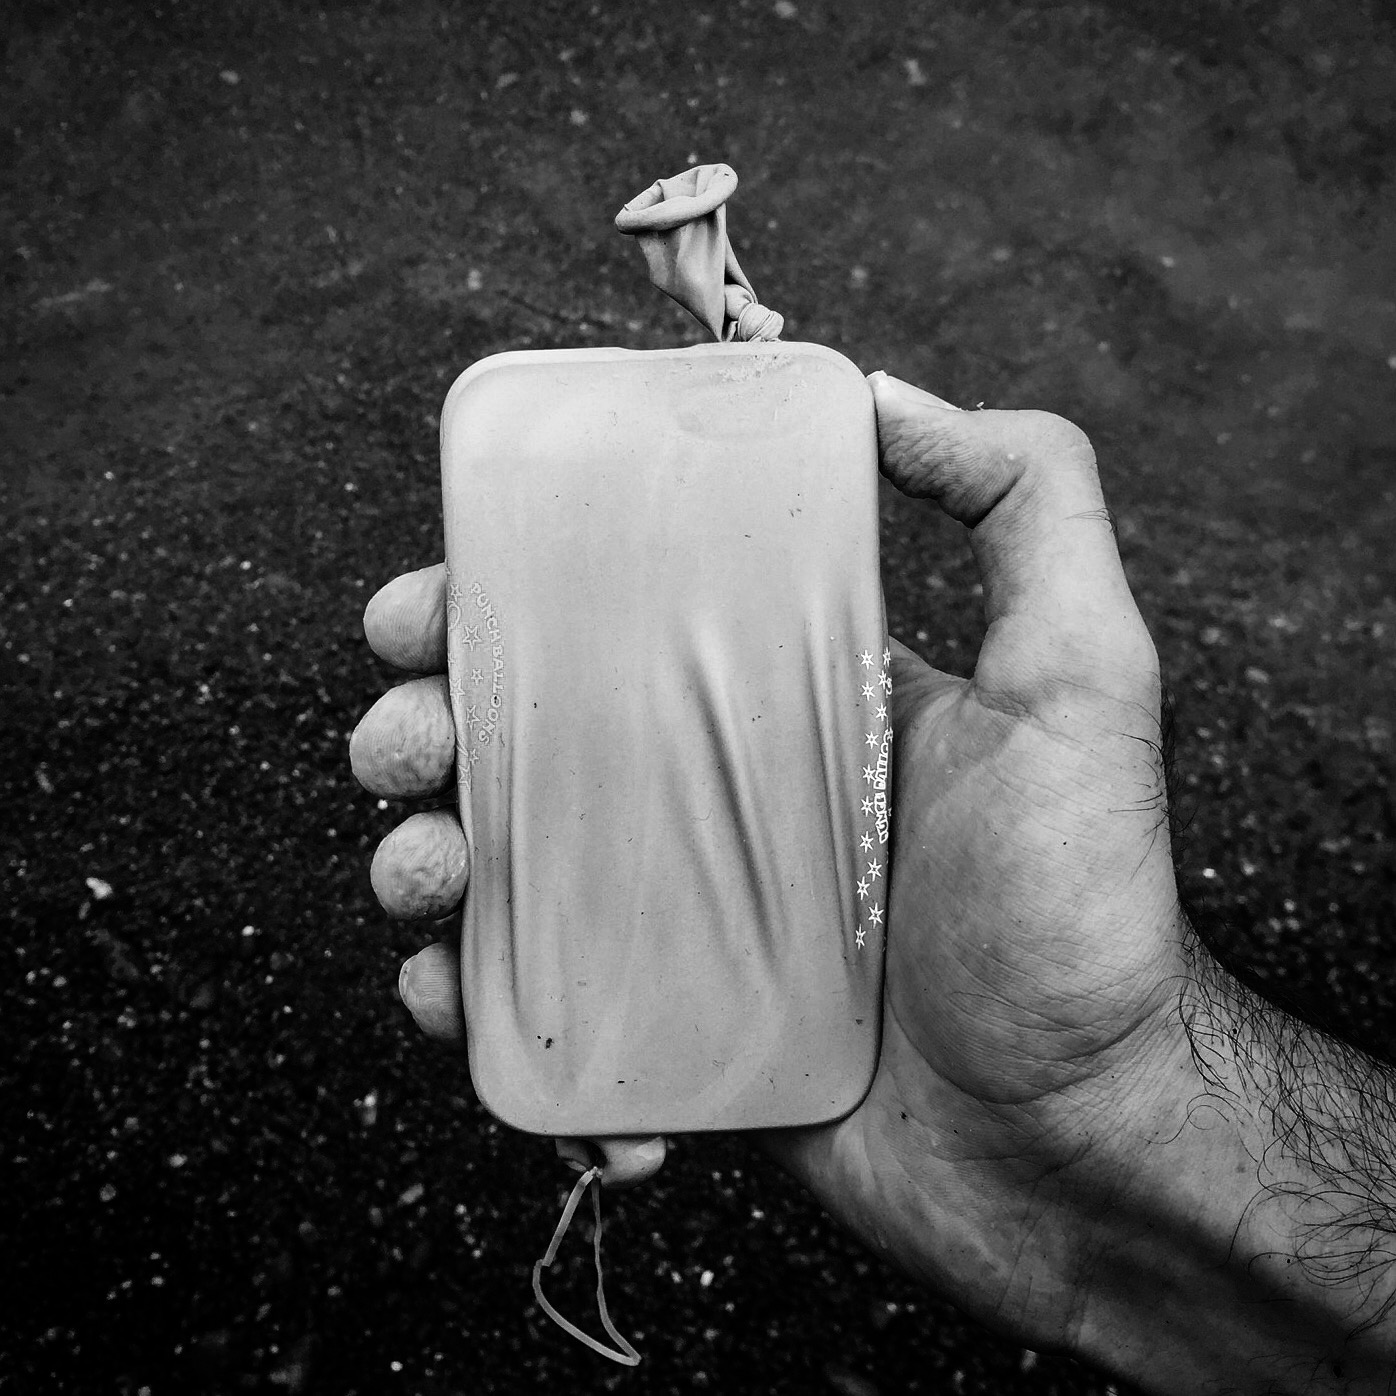 A cellphone protected by plastic. Lesbos, Greece.